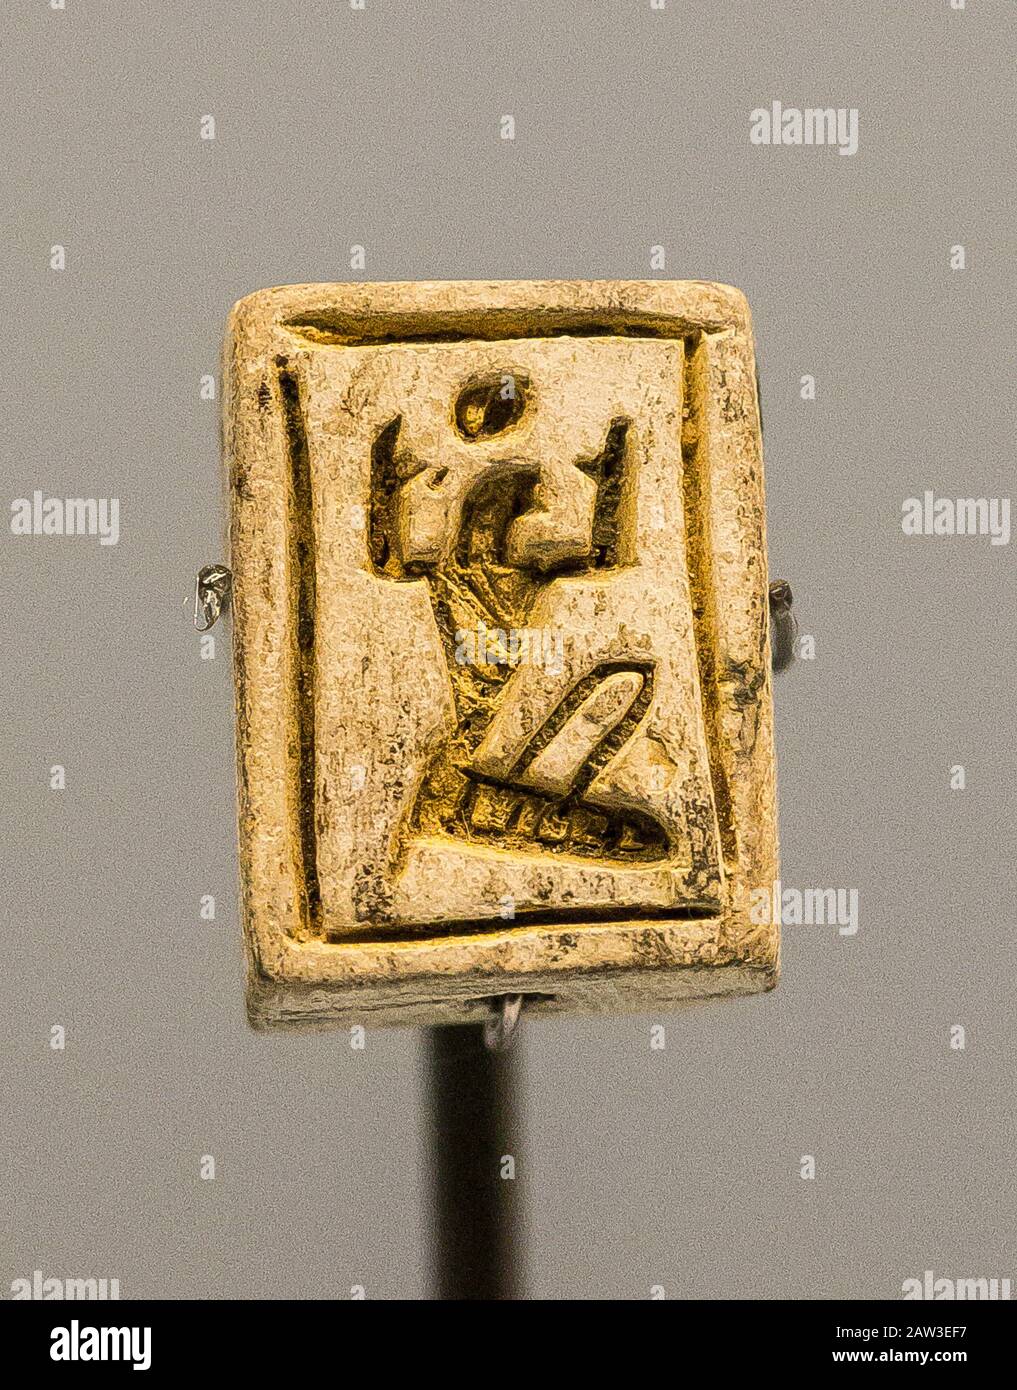 Opening visit of the exhibition “Osiris, Egypt's Sunken Mysteries”. Alexandria, Maritime Museum, small amulette depicting the god Shu. Stock Photo